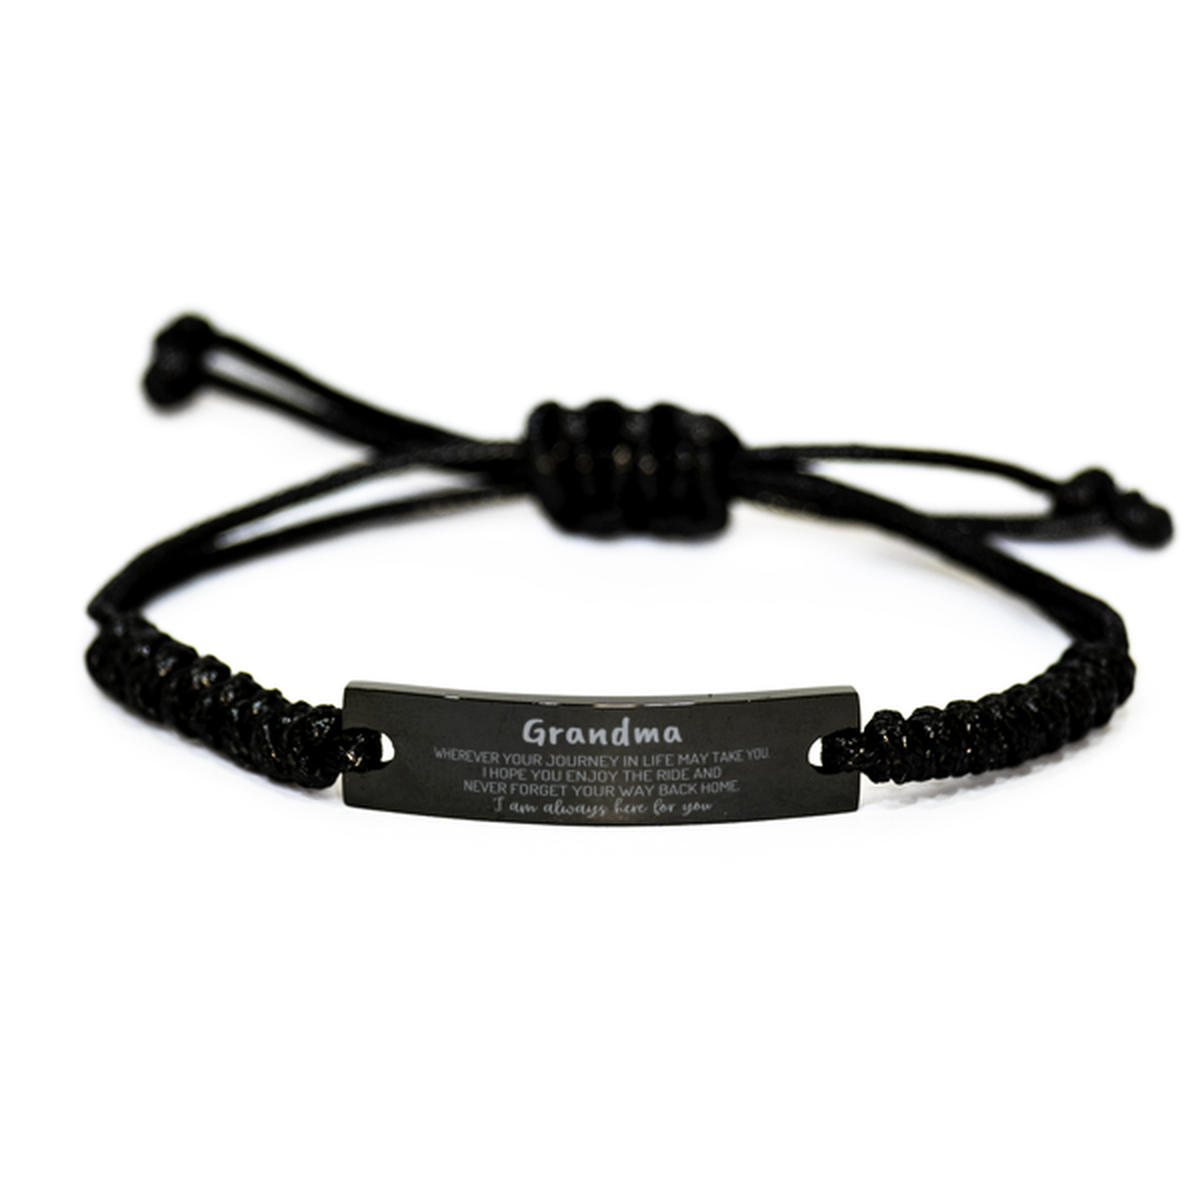 Grandma wherever your journey in life may take you, I am always here for you Grandma Black Rope Bracelet, Awesome Christmas Gifts For Grandma, Grandma Birthday Gifts for Men Women Family Loved One